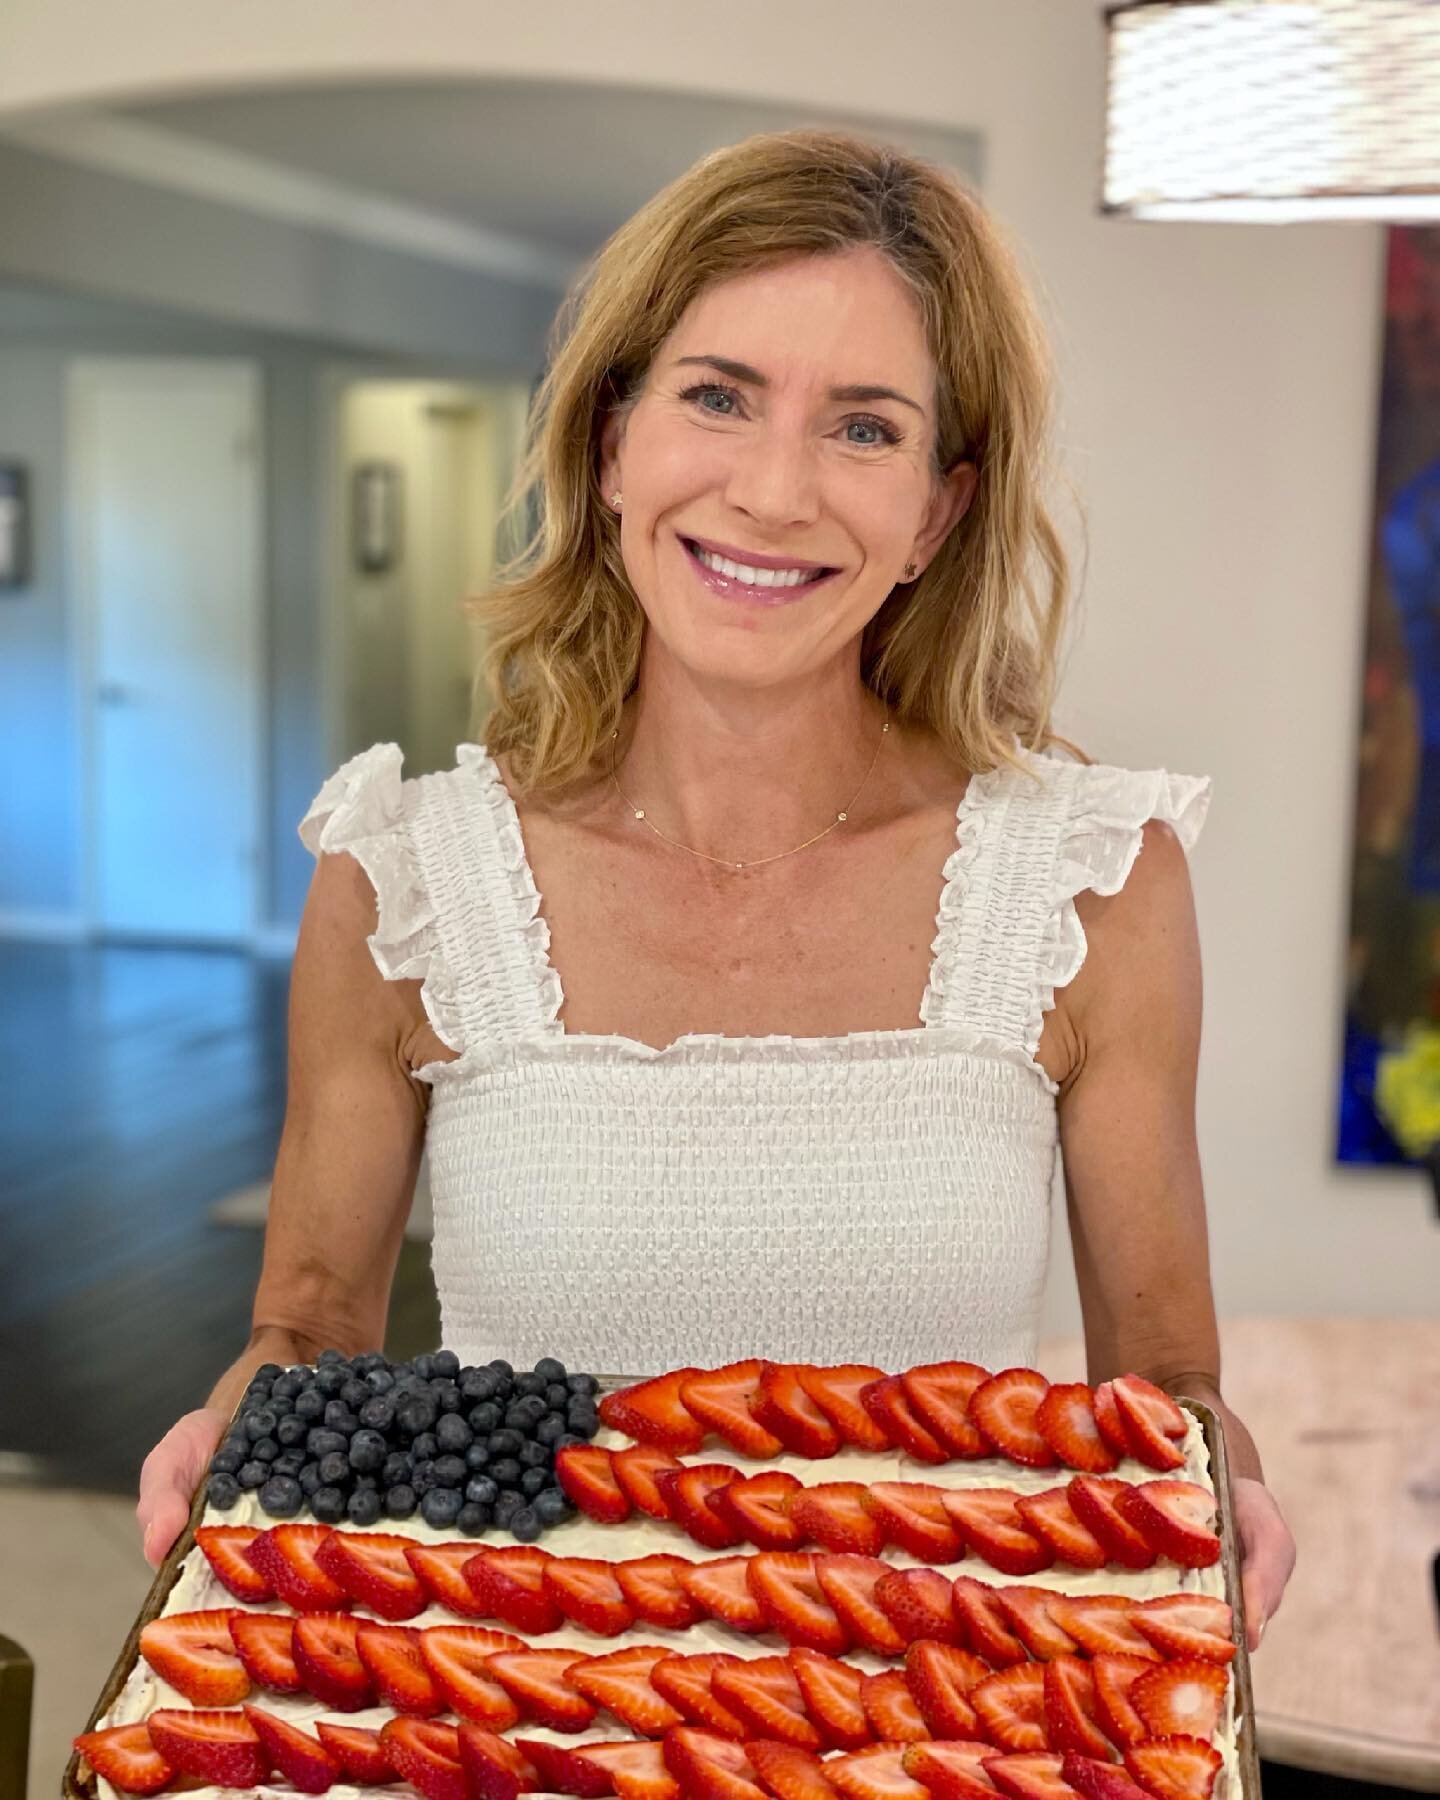 Happy 4th of July eve! It&rsquo;s not America&rsquo;s birthday party without a flag cake! 🇺🇸 Brooks and I are so happy to be celebrating with our sweet parents! Hope everyone is having a festive holiday weekend! Happy birthday America! 🥰 🇺🇸